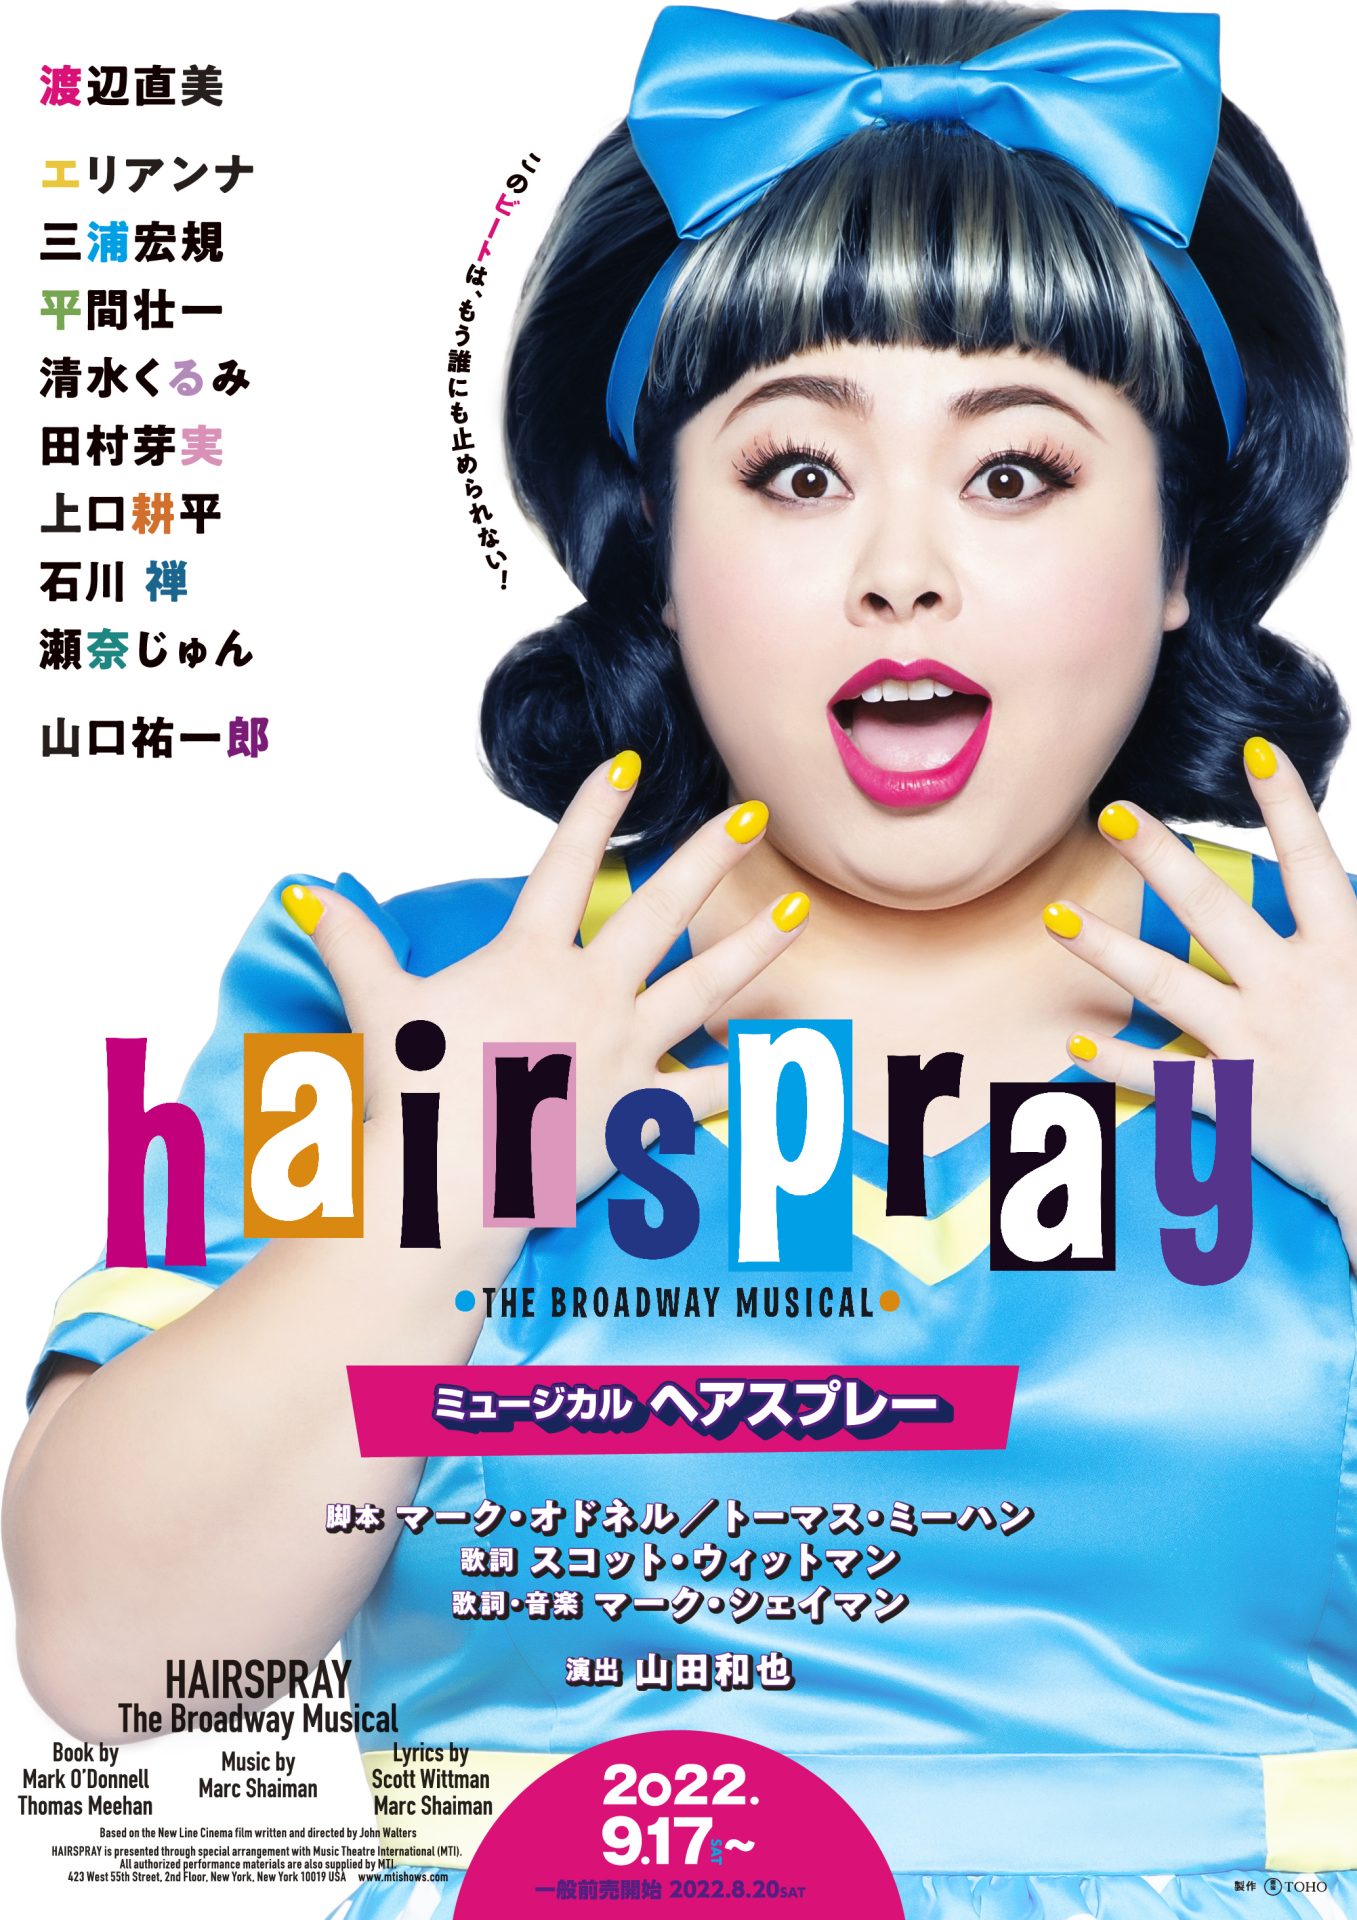 NAOMI TO STAR IN THE FIRST JAPANESE PRODUCTION OF MUSICAL HAIRSPRAY